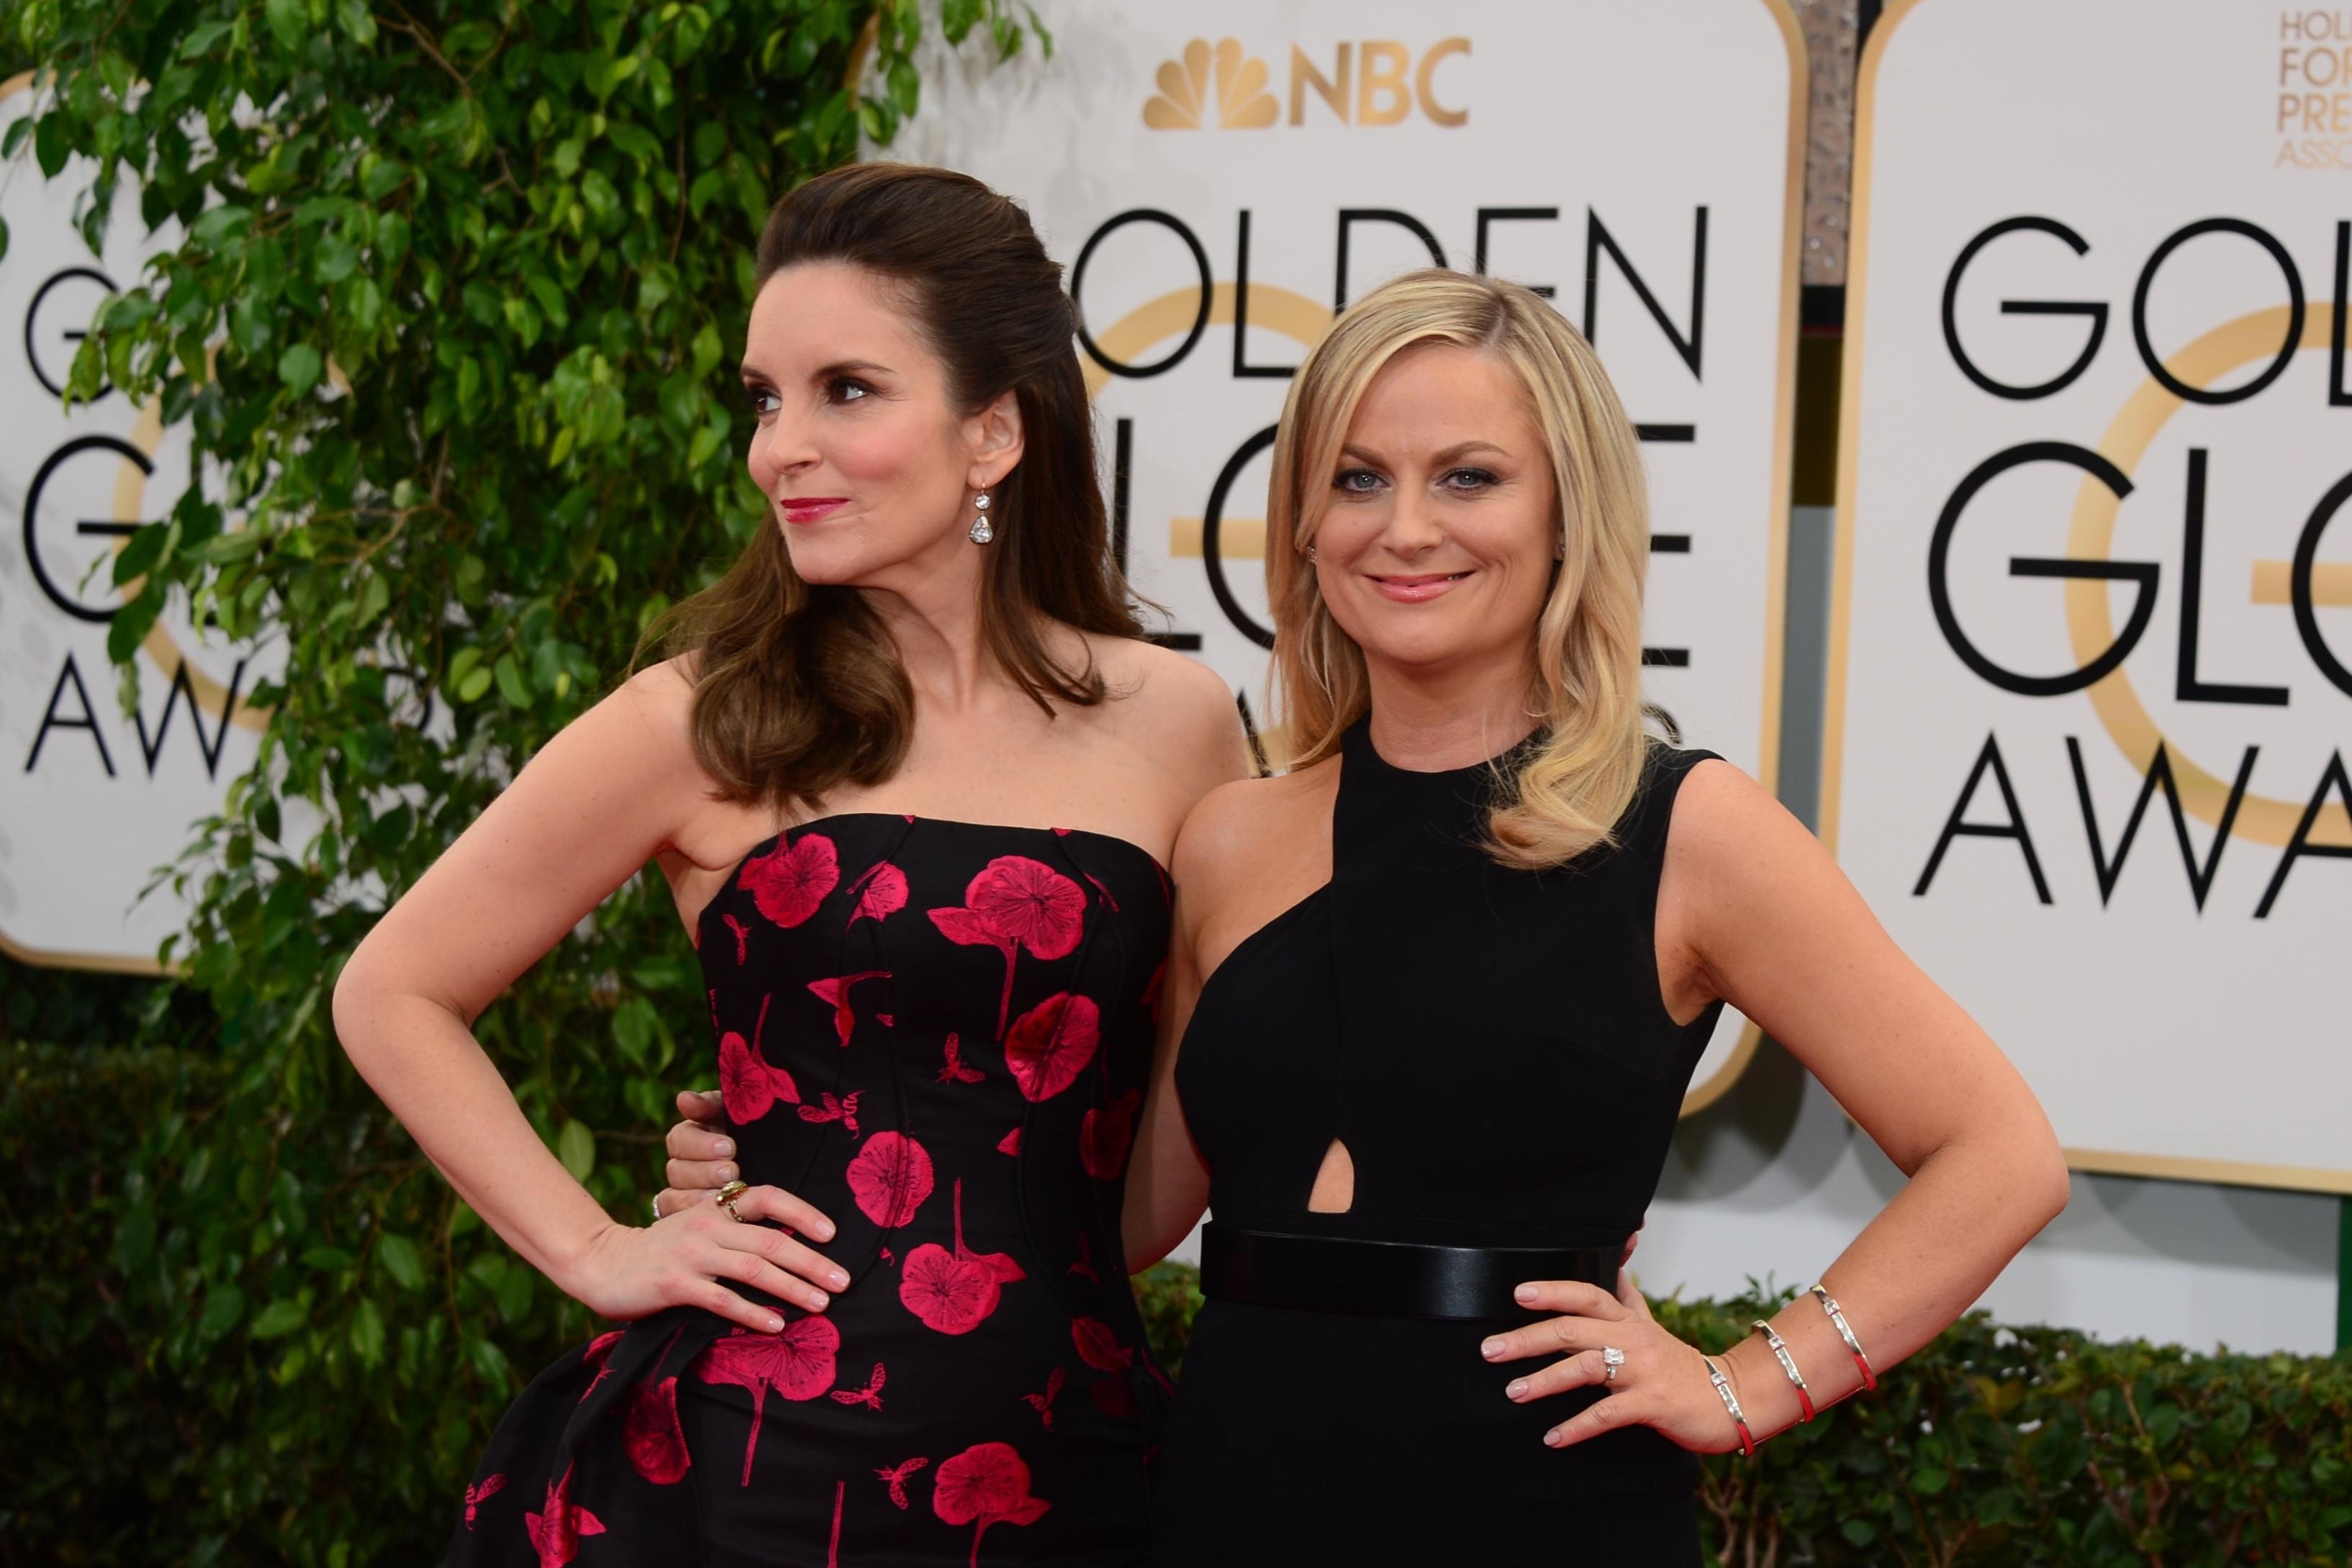 Tina Fey and Amy Poehler on the red carpet for the 2014 globes. Fey is in a black and red dress, Poehler is in black.